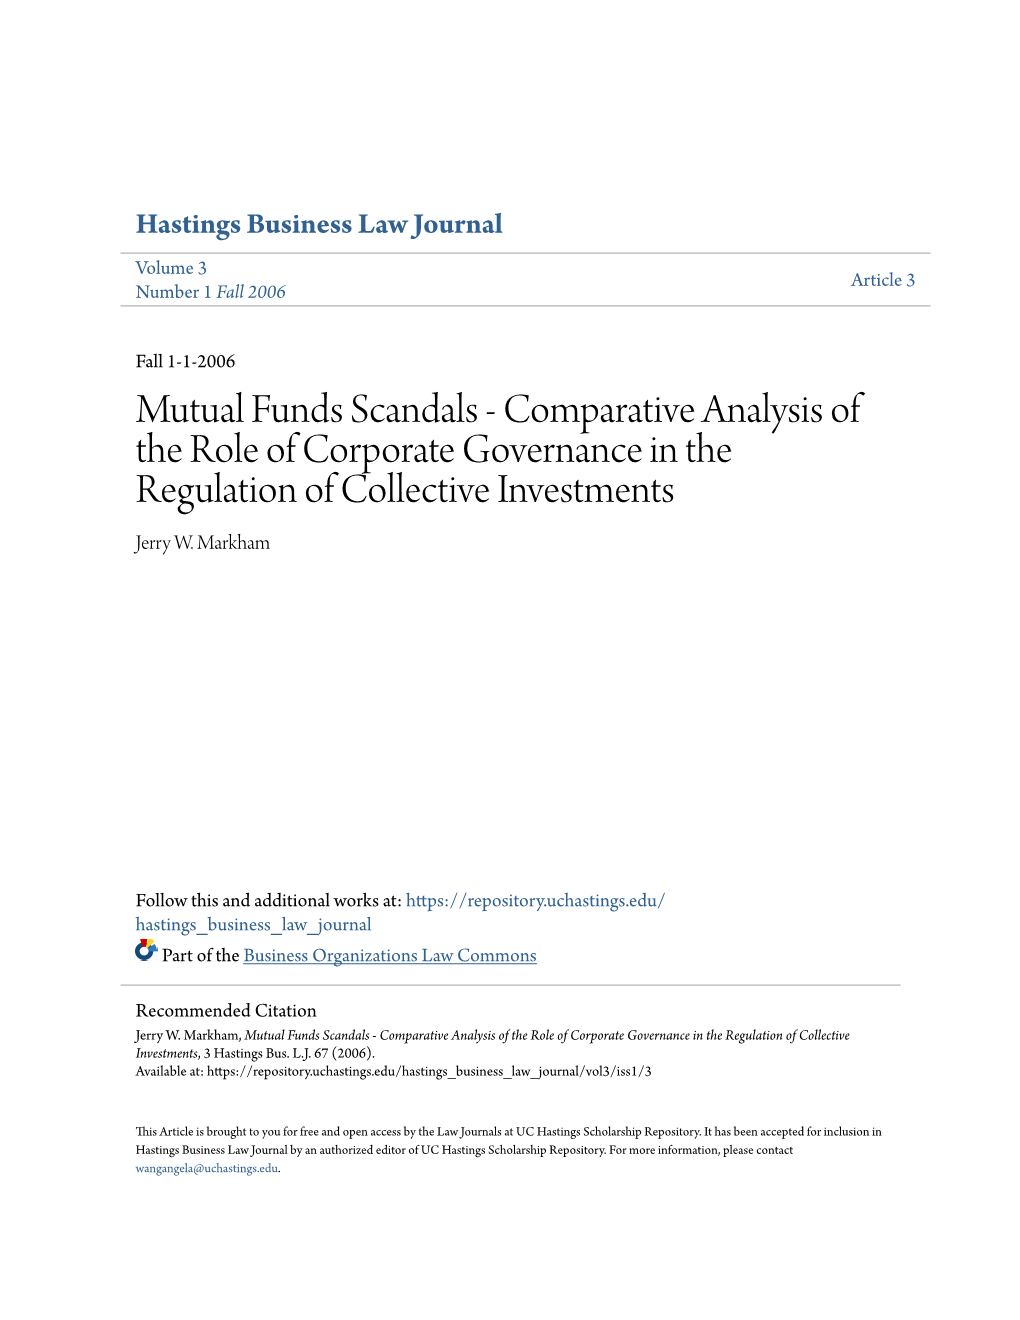 Mutual Funds Scandals - Comparative Analysis of the Role of Corporate Governance in the Regulation of Collective Investments Jerry W